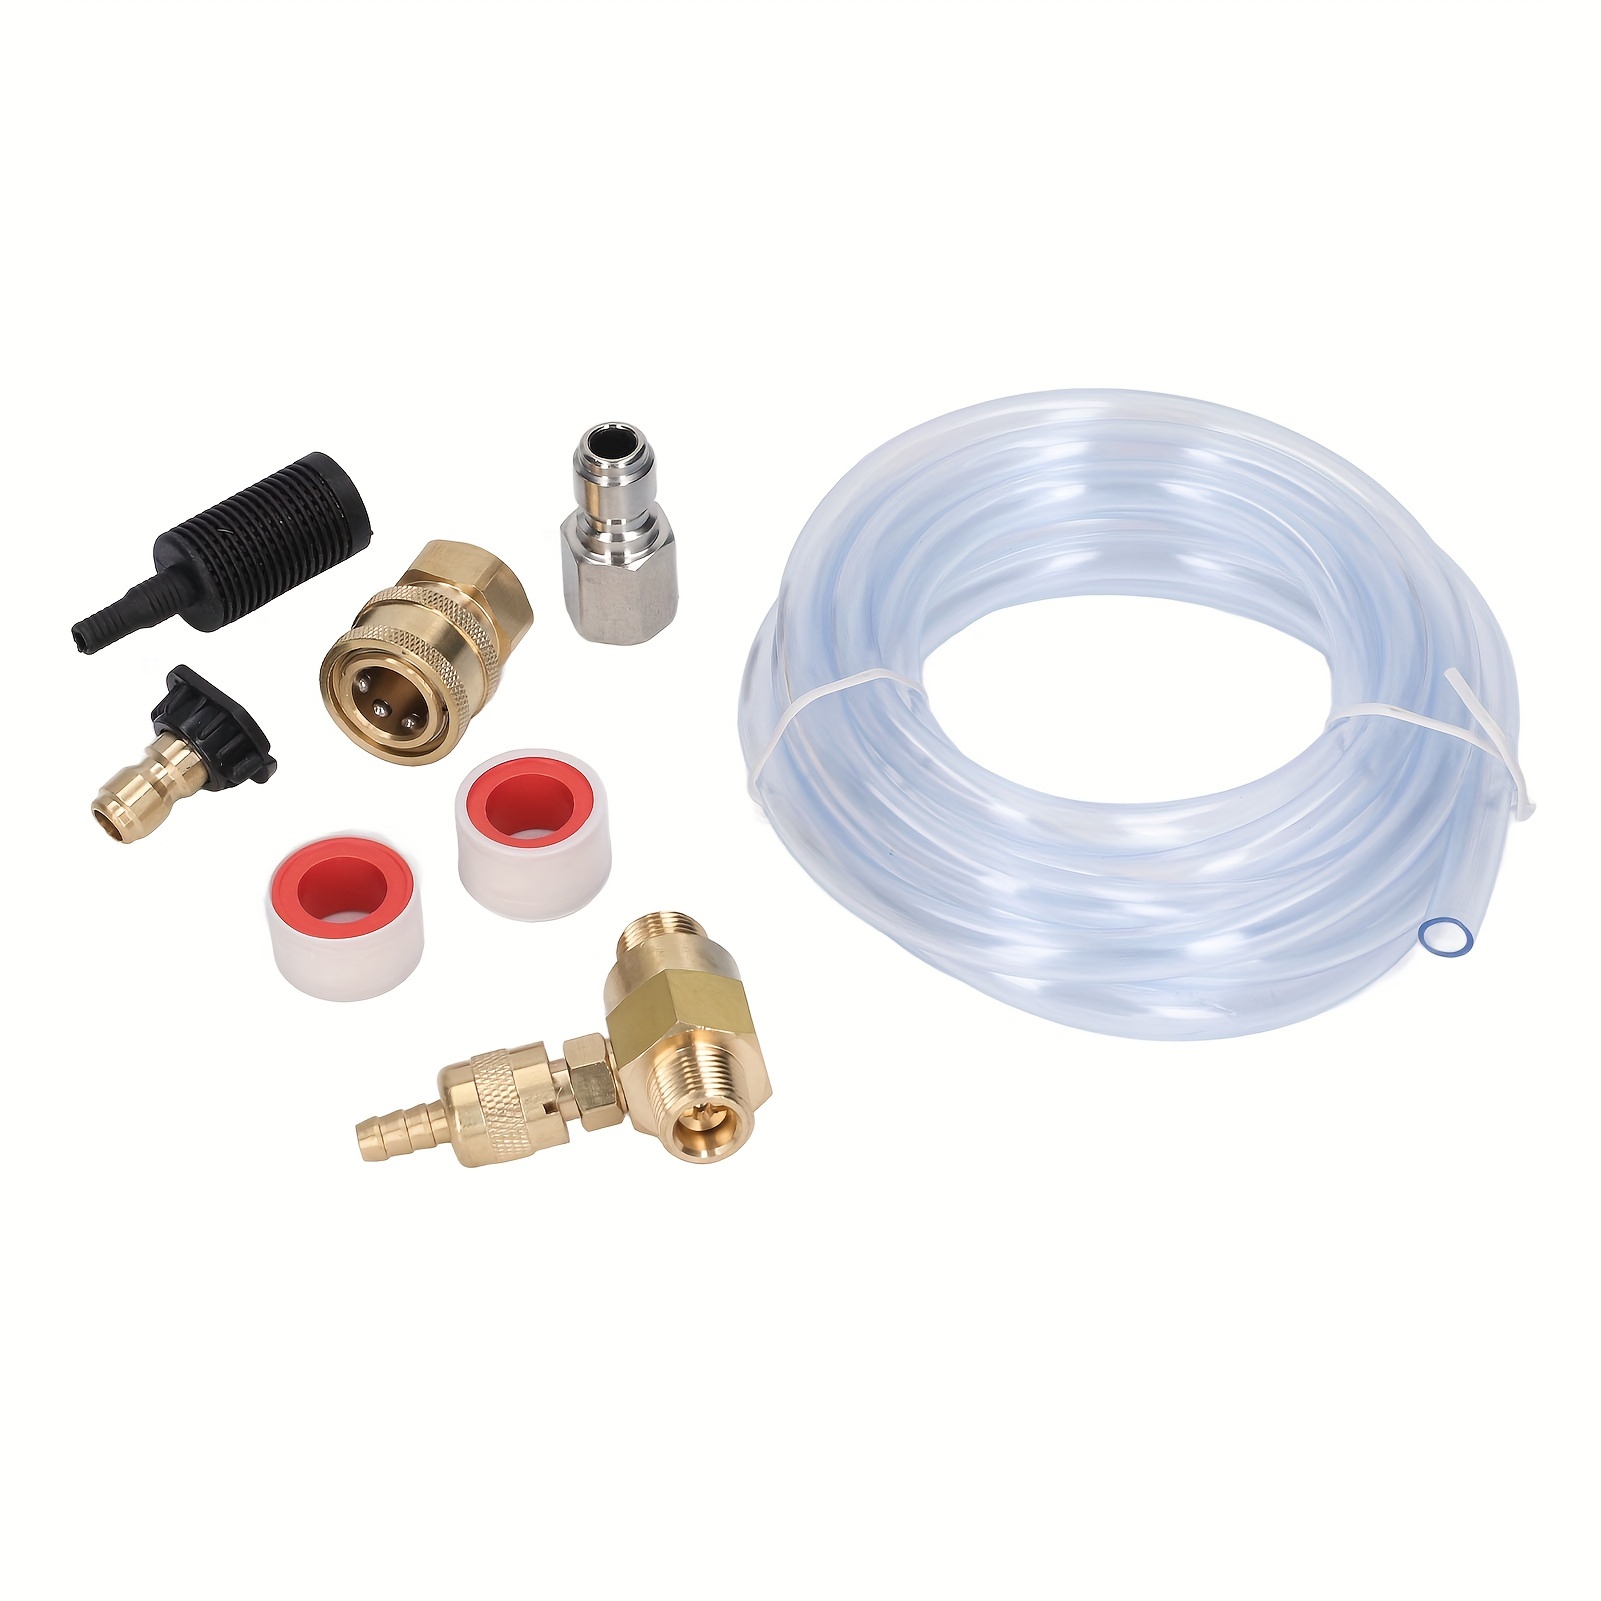 

Chemical Injector Kit For High Pressure Washer, 5000 Psi Adjustable Soap Dispenser With A 1/4 Inch Black Soap Nozzle And Teflon Tape, 16 Ft Siphon Hose, 3/8 Inch Quick Connect